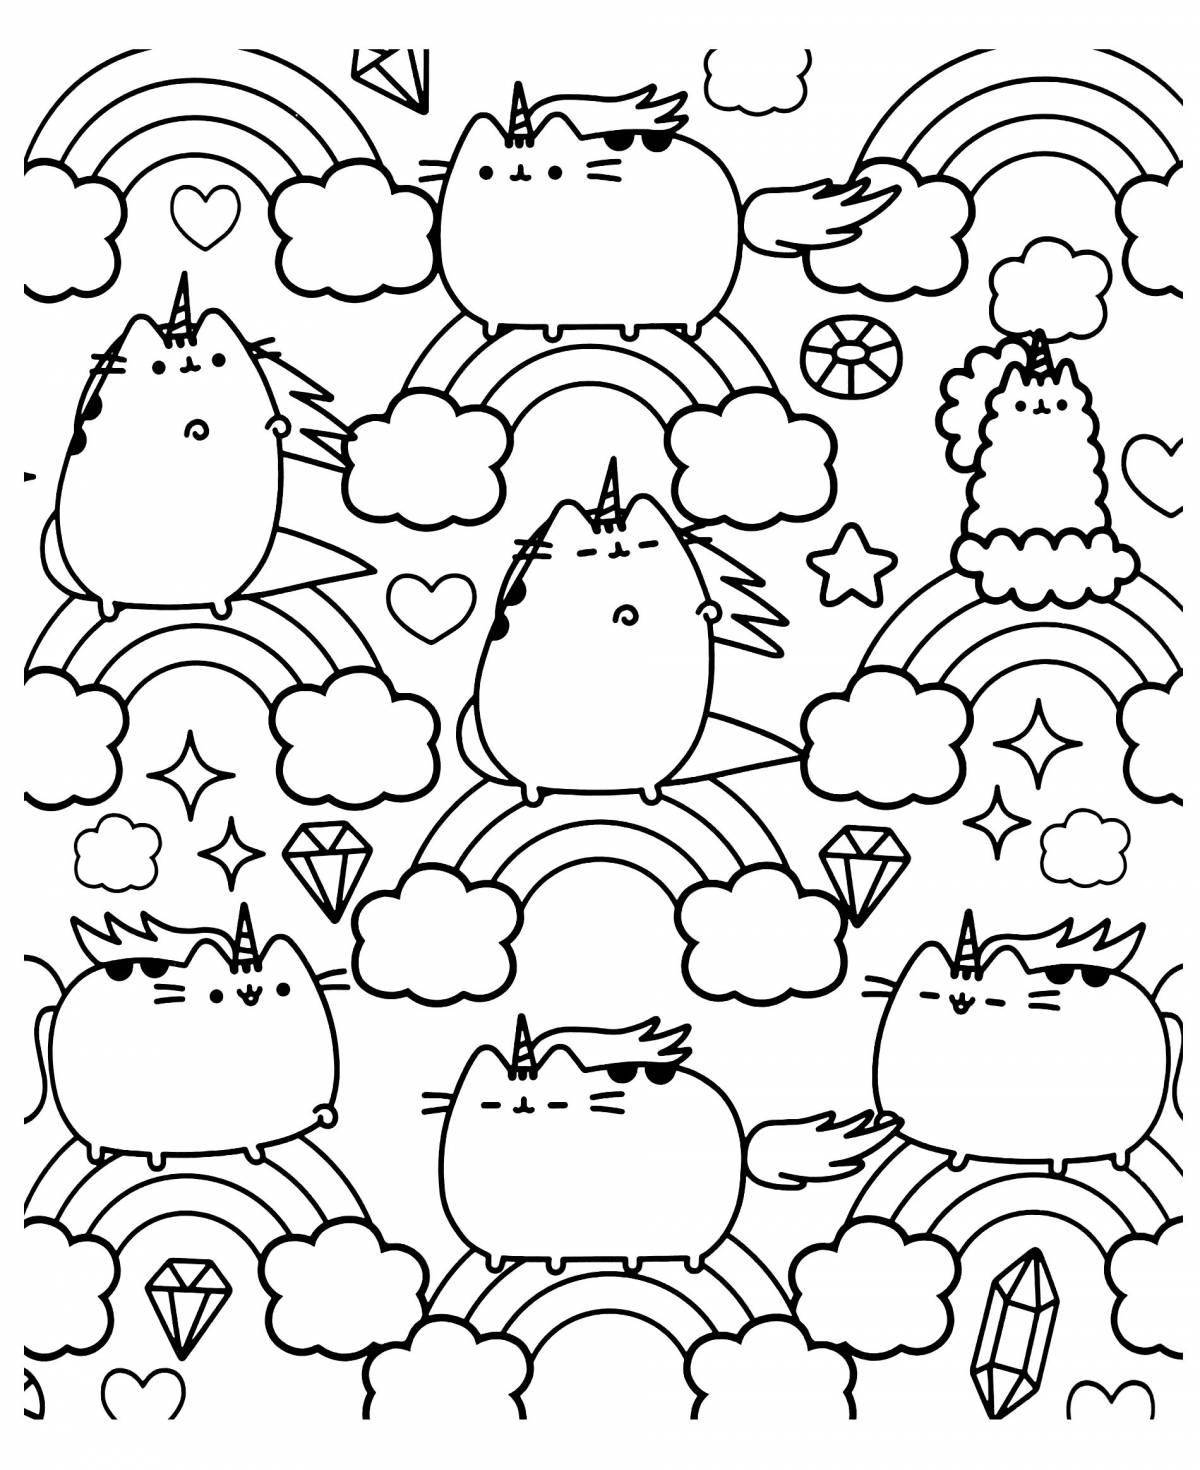 Happy pusheen coloring page